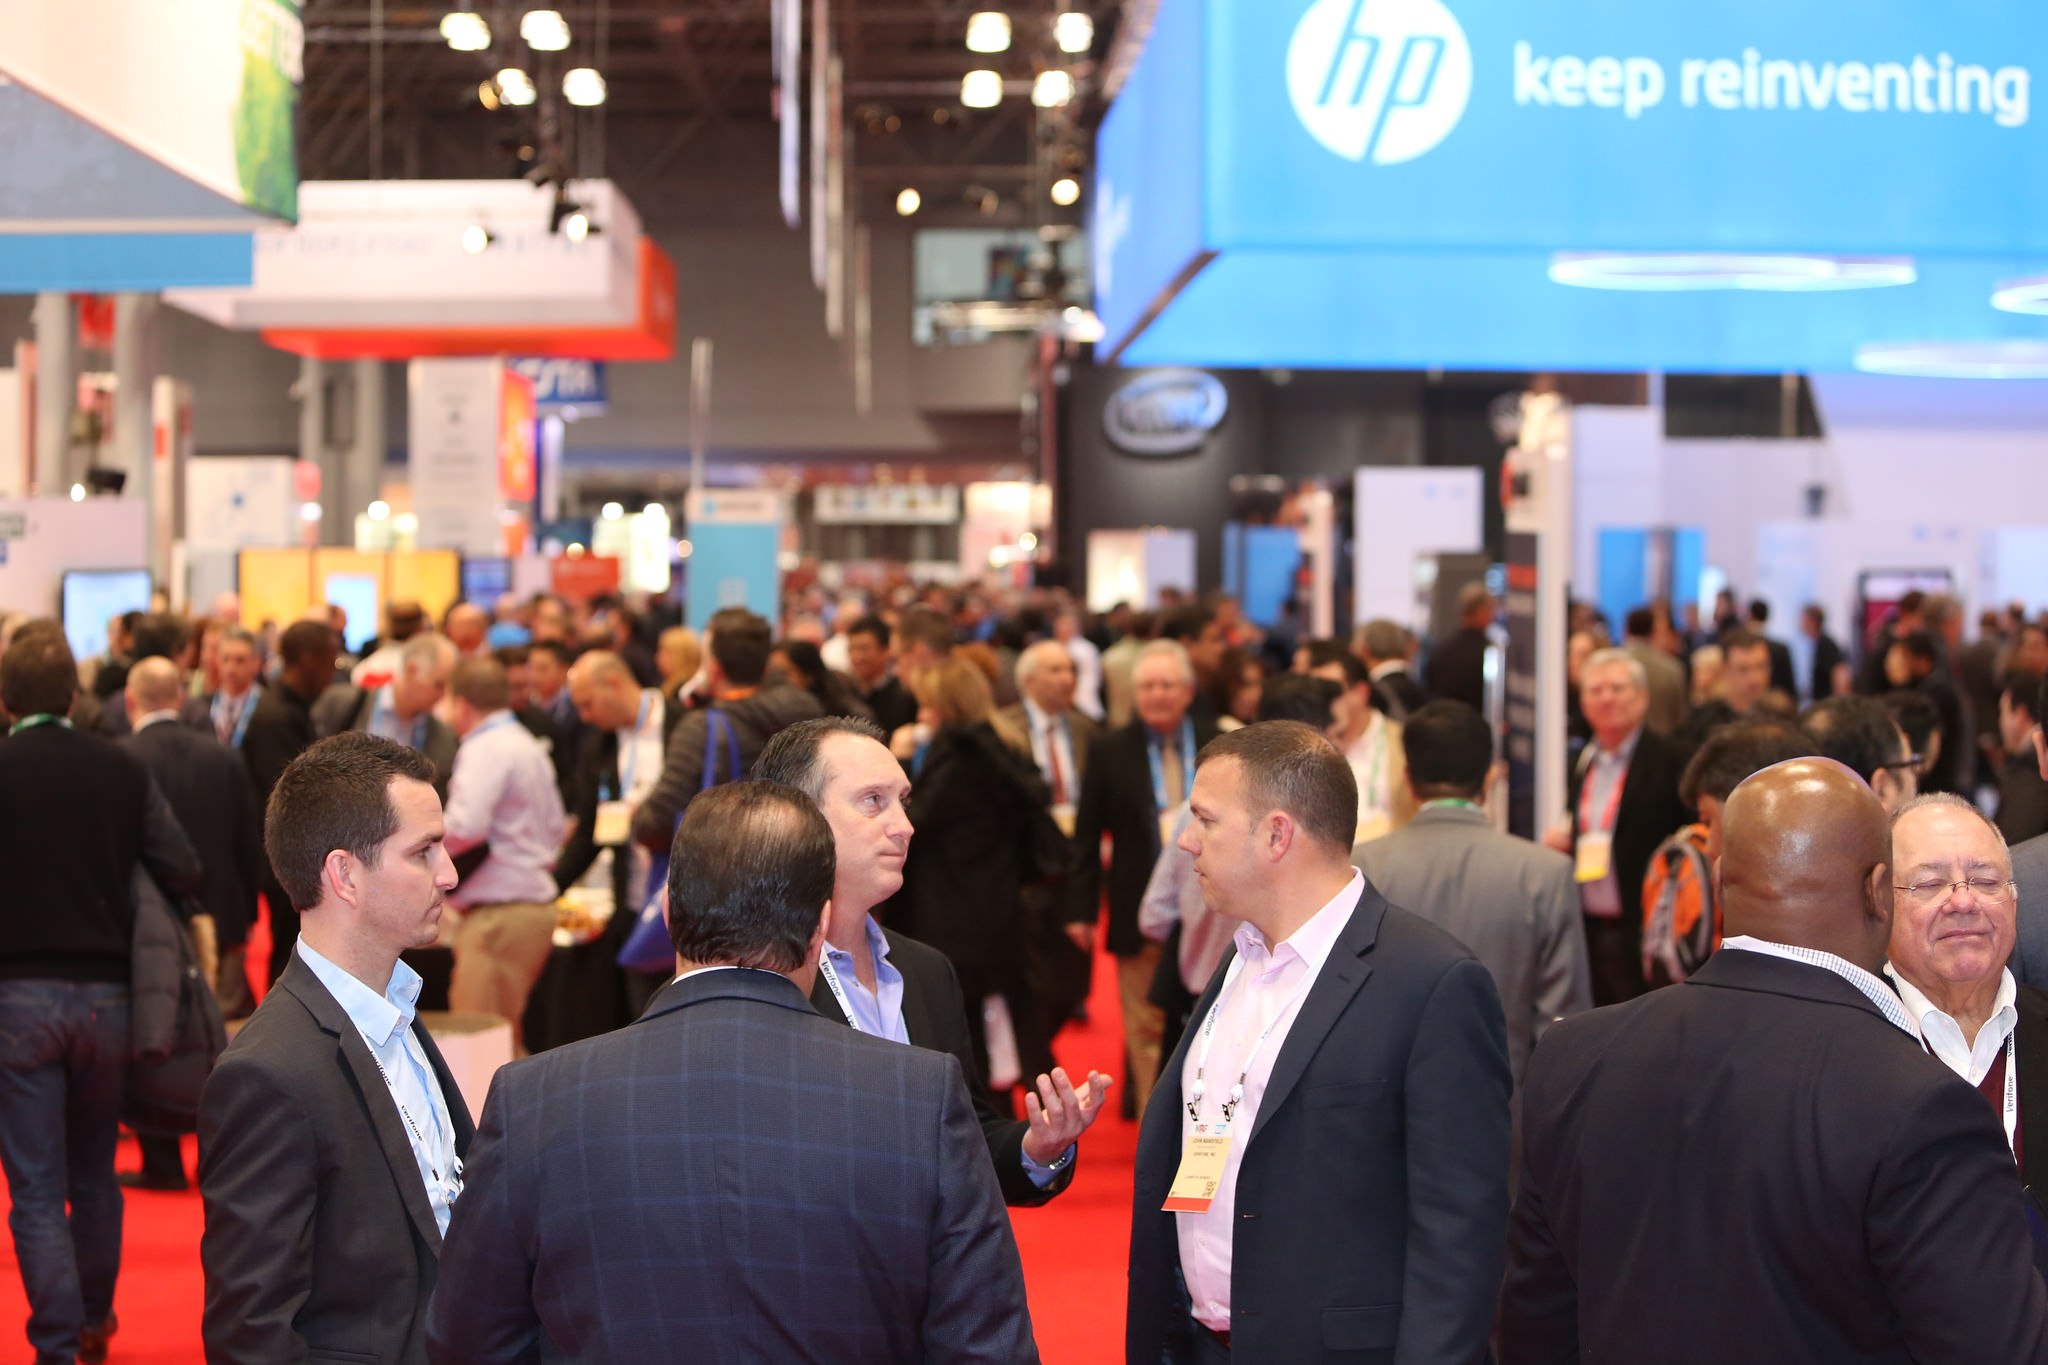 An Attendee Experience Designed to ‘Surprise and Delight’ at NRF Big